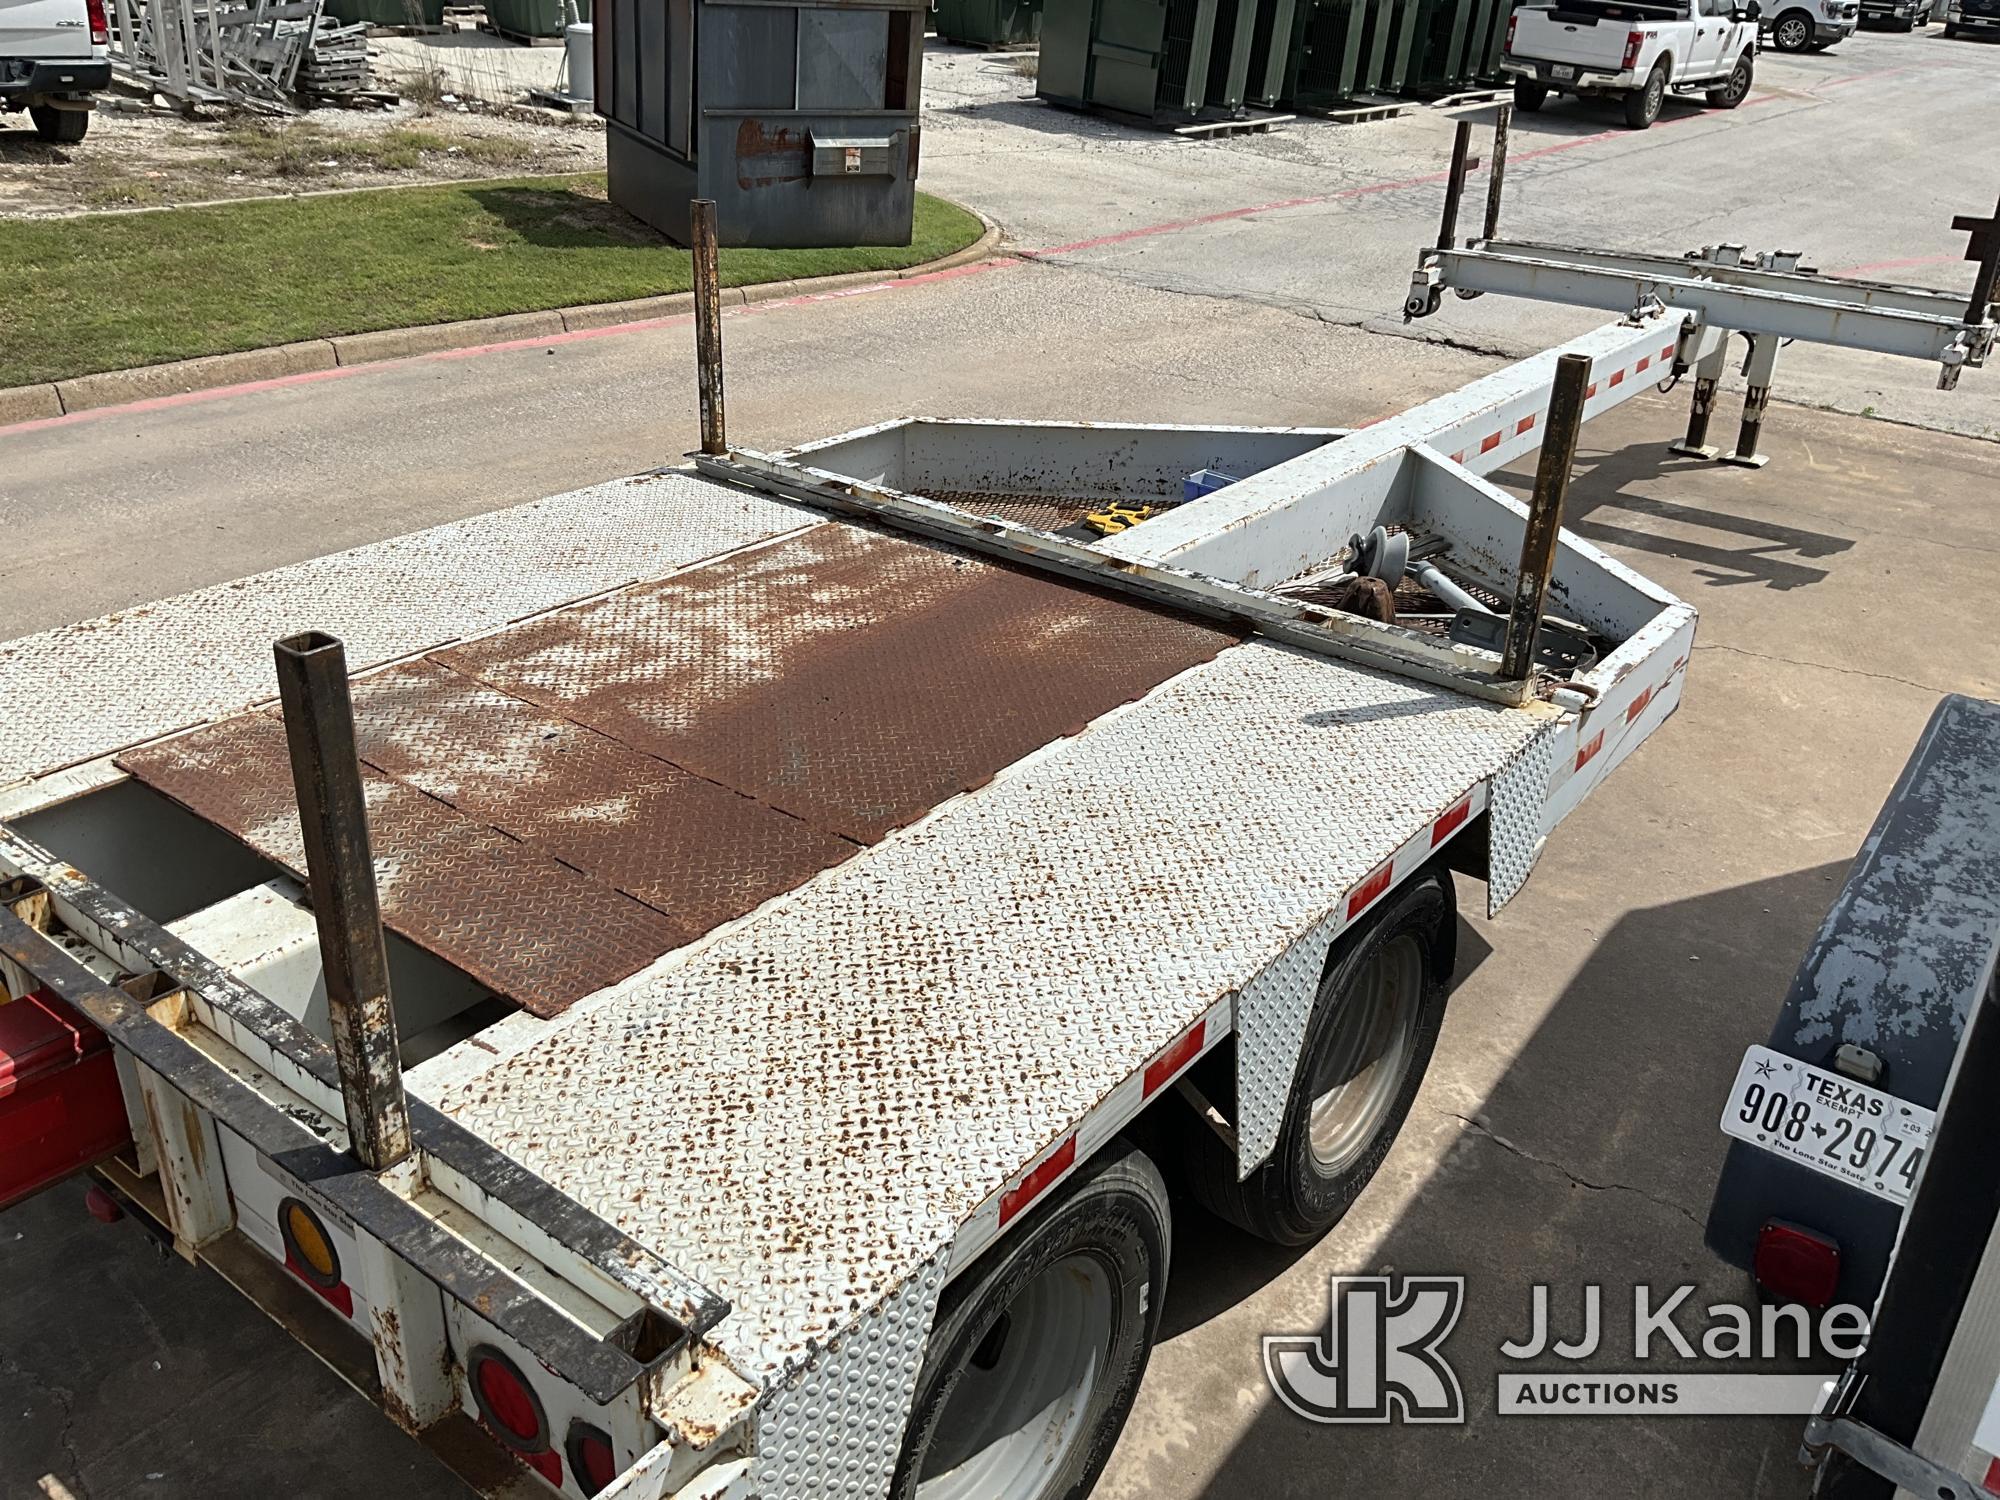 (Azle, TX) 2010 J.D.H Trussmaster Trailer T/A Extendable Pole/Material Trailer, Cooperative owned Wi